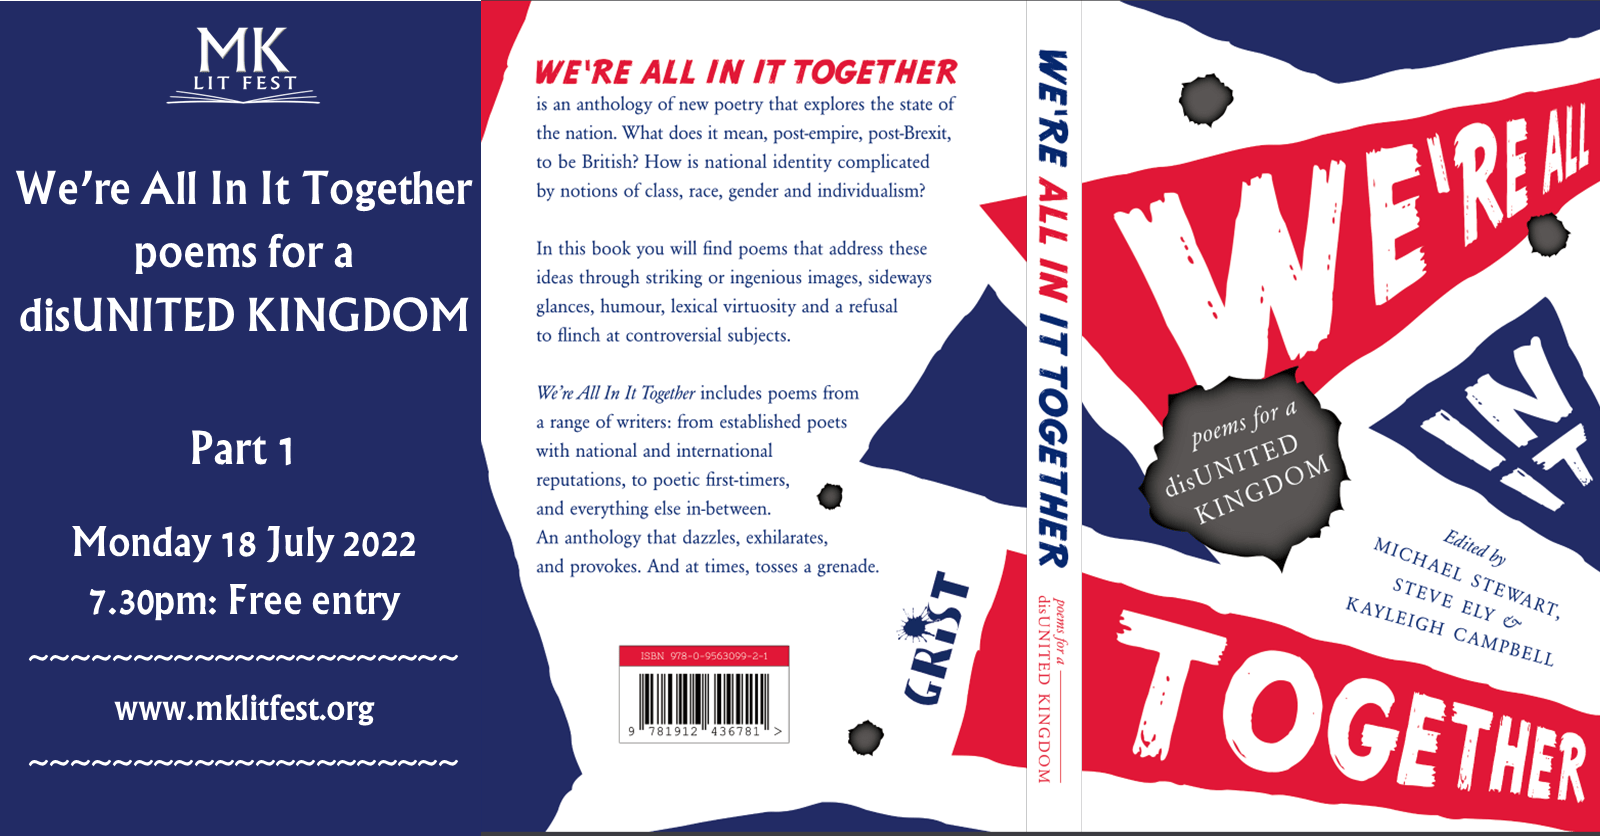 We’re All In It Together: poems for a disUNITED KINGDOM (Part 1) Top Image